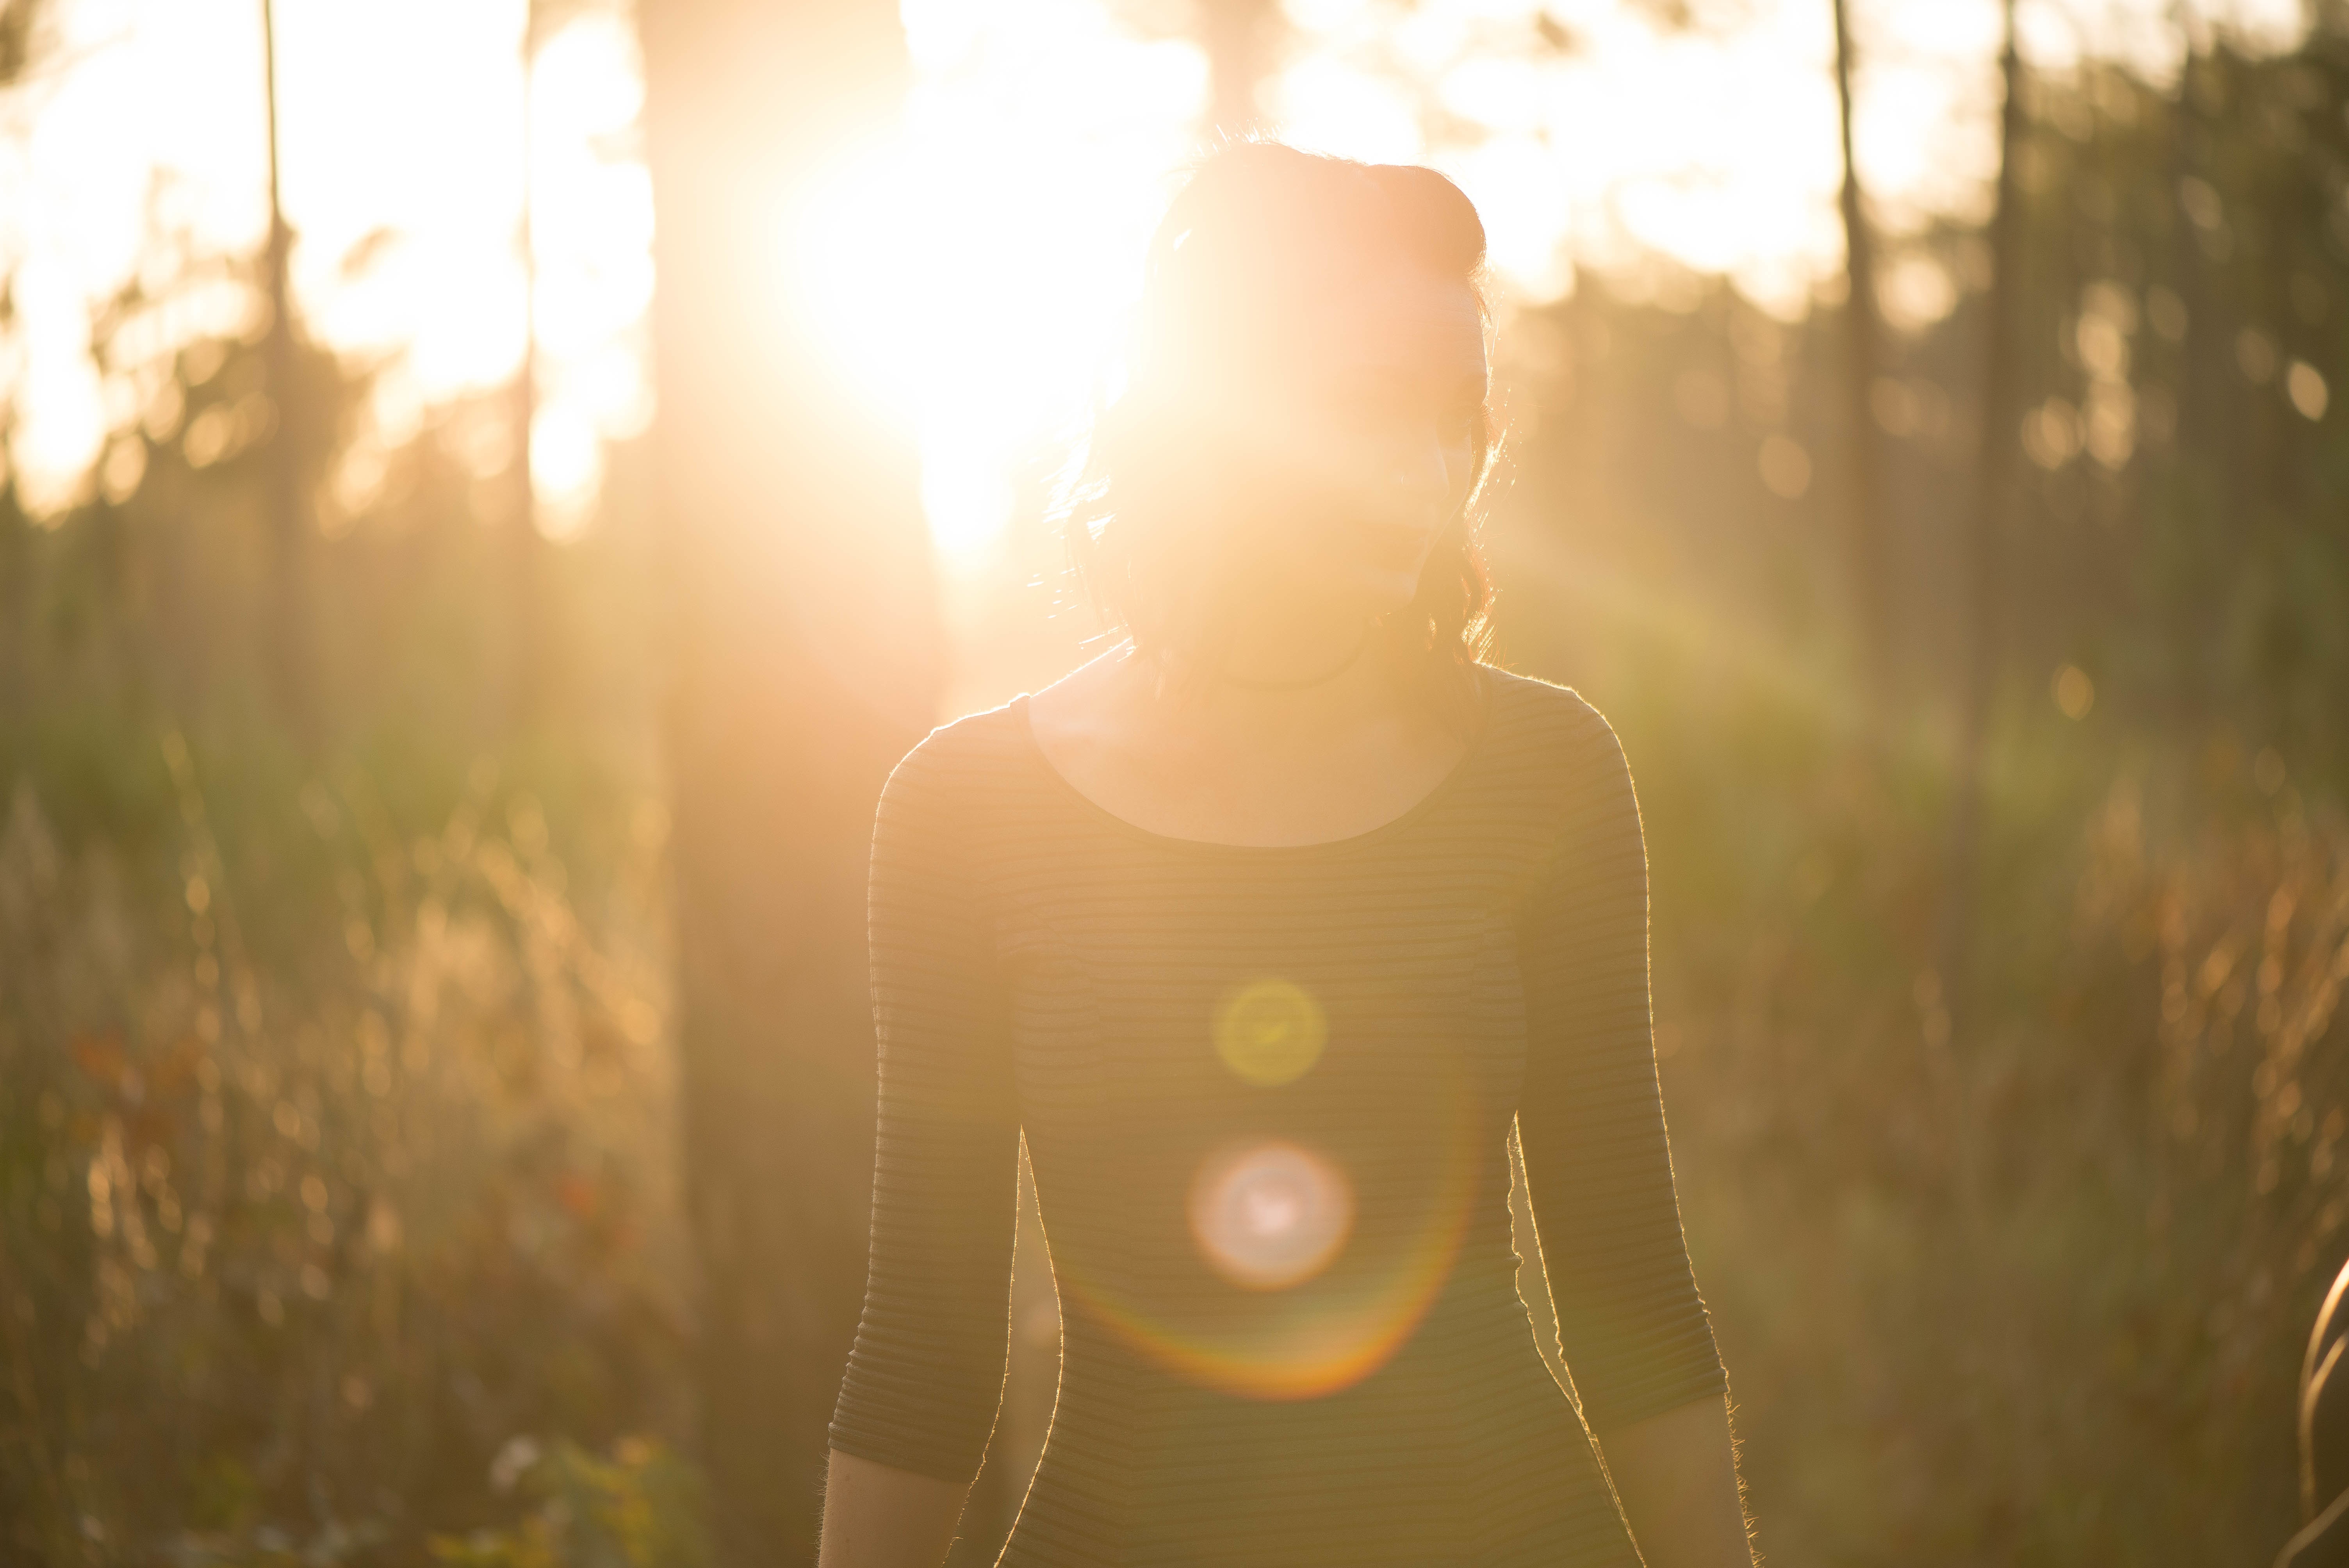 Woman walking through nature at dawn with the sun behind her